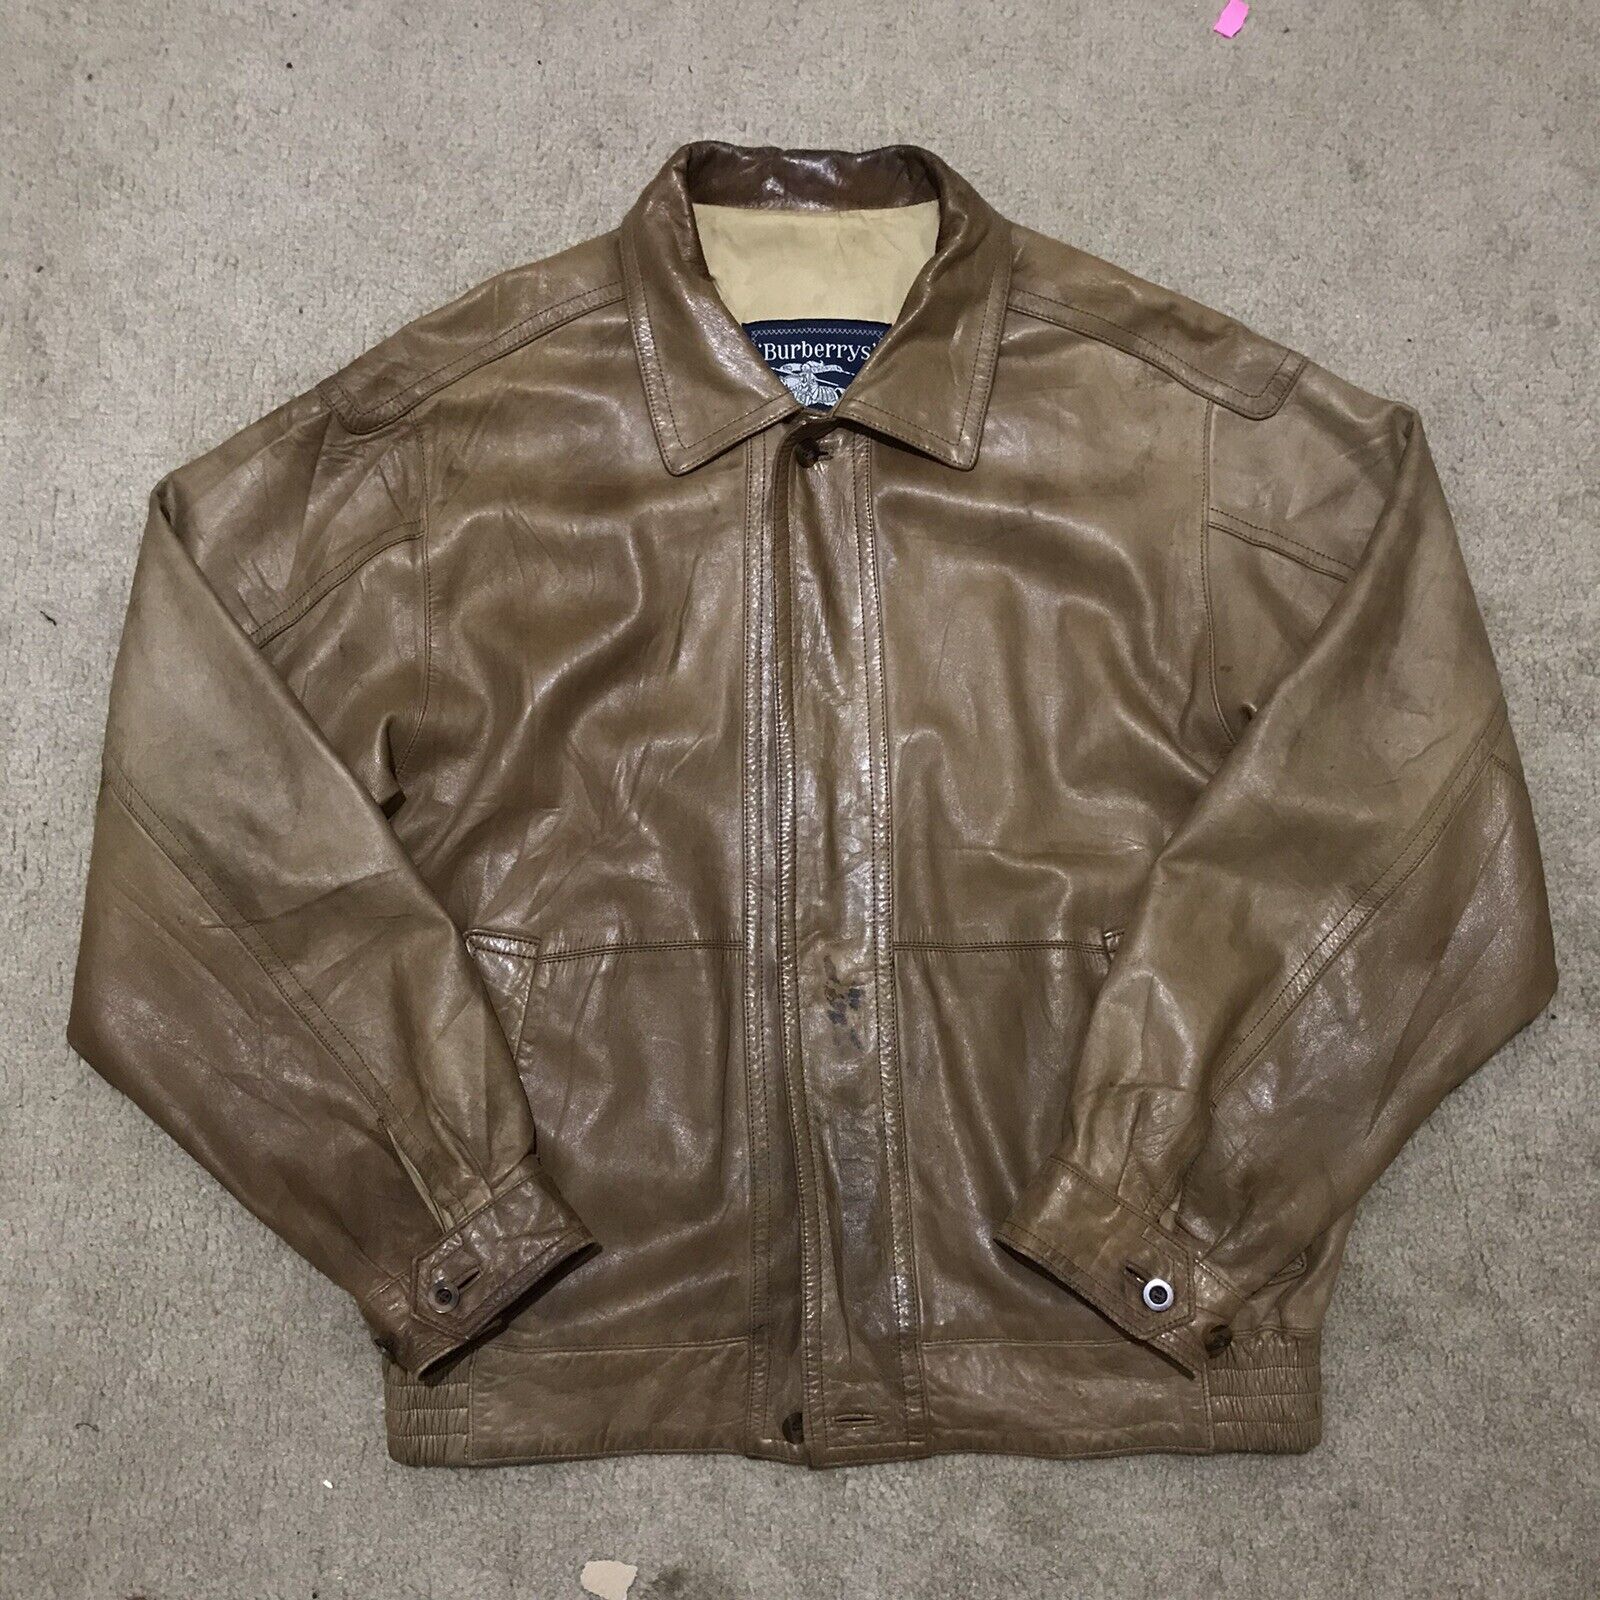 Vintage BURBERRY's Jacket coat LEATHER Bomber Lined BROWN size 39 /M